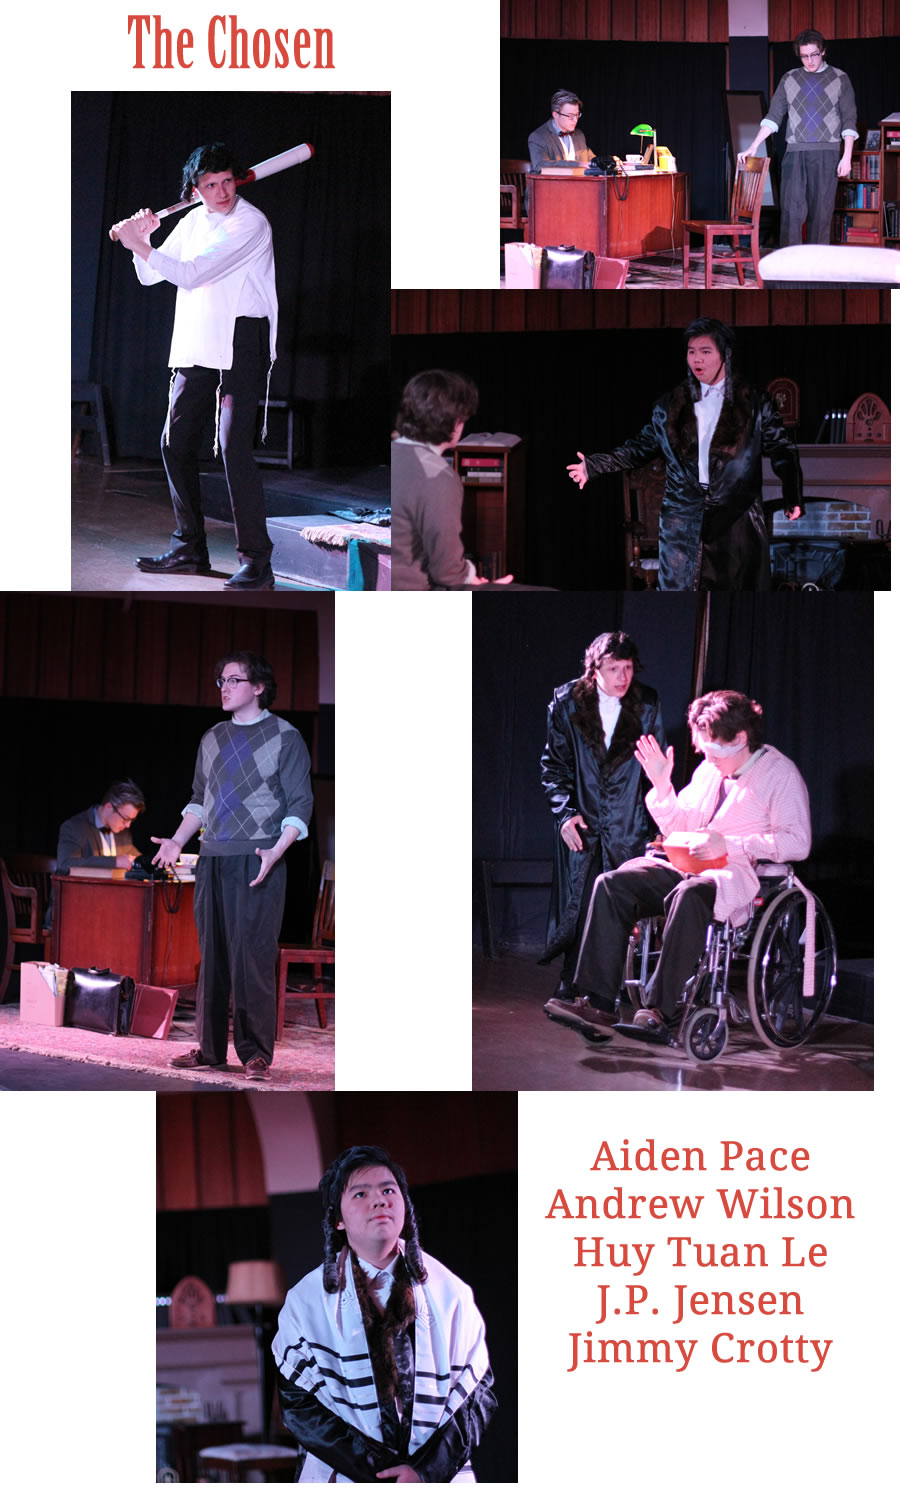 Photos from the Play "The Chosen"